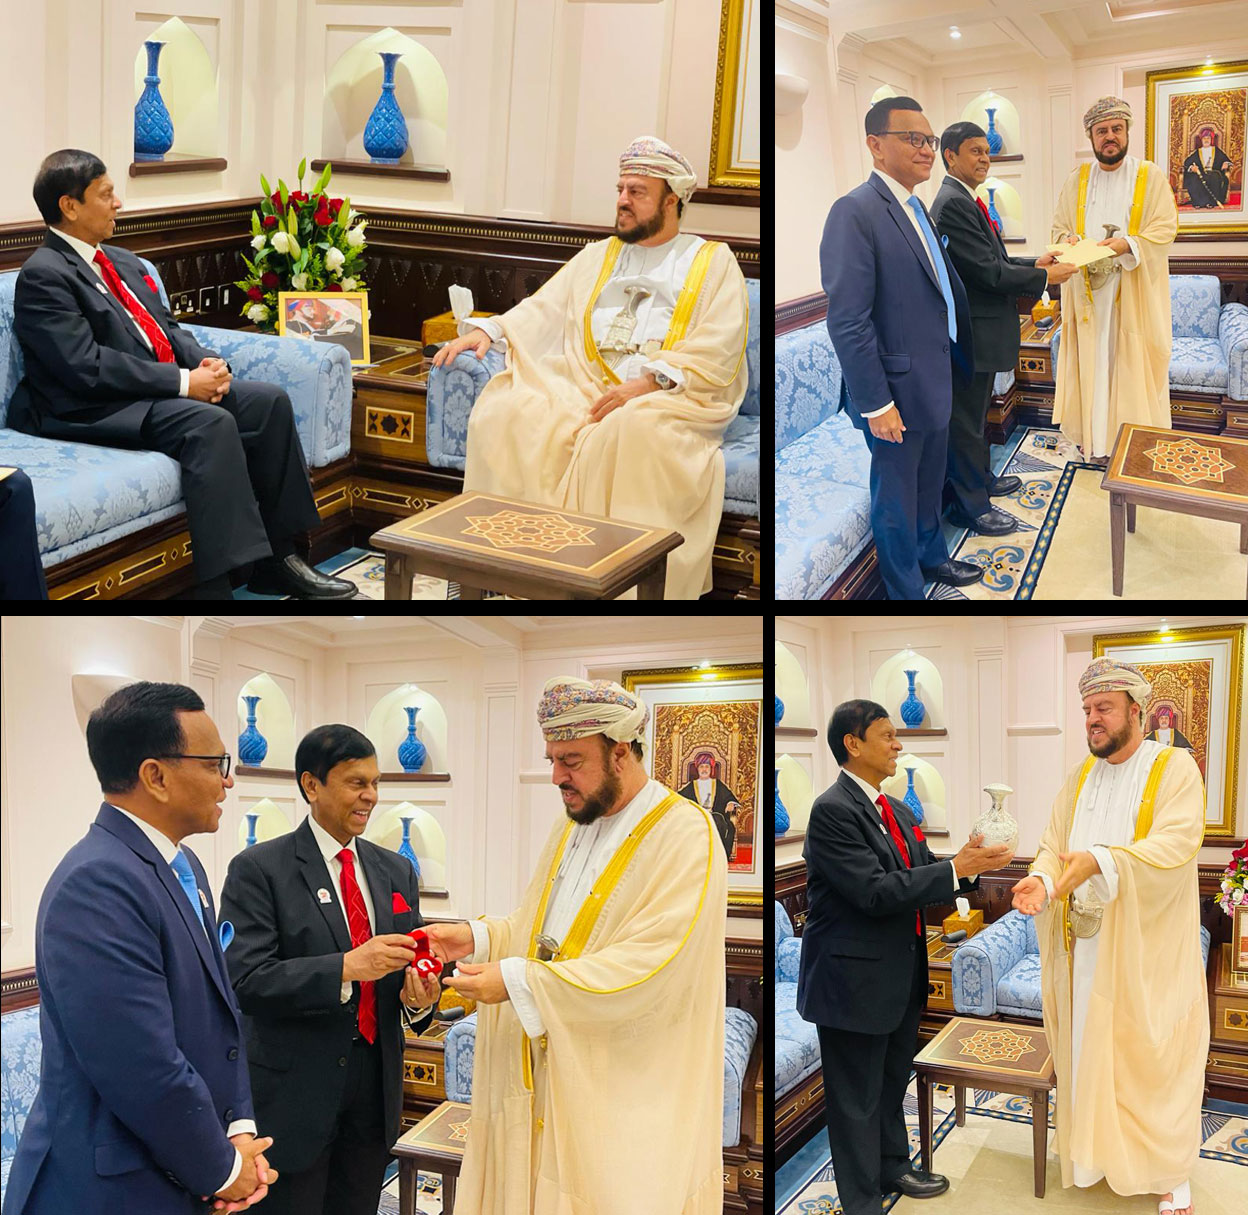 businesscafe State Minister of Finance Ajith Nivard Cabraal meets with the Sultans Deputy Prime Minister for International Relations and Cooperation in Oman